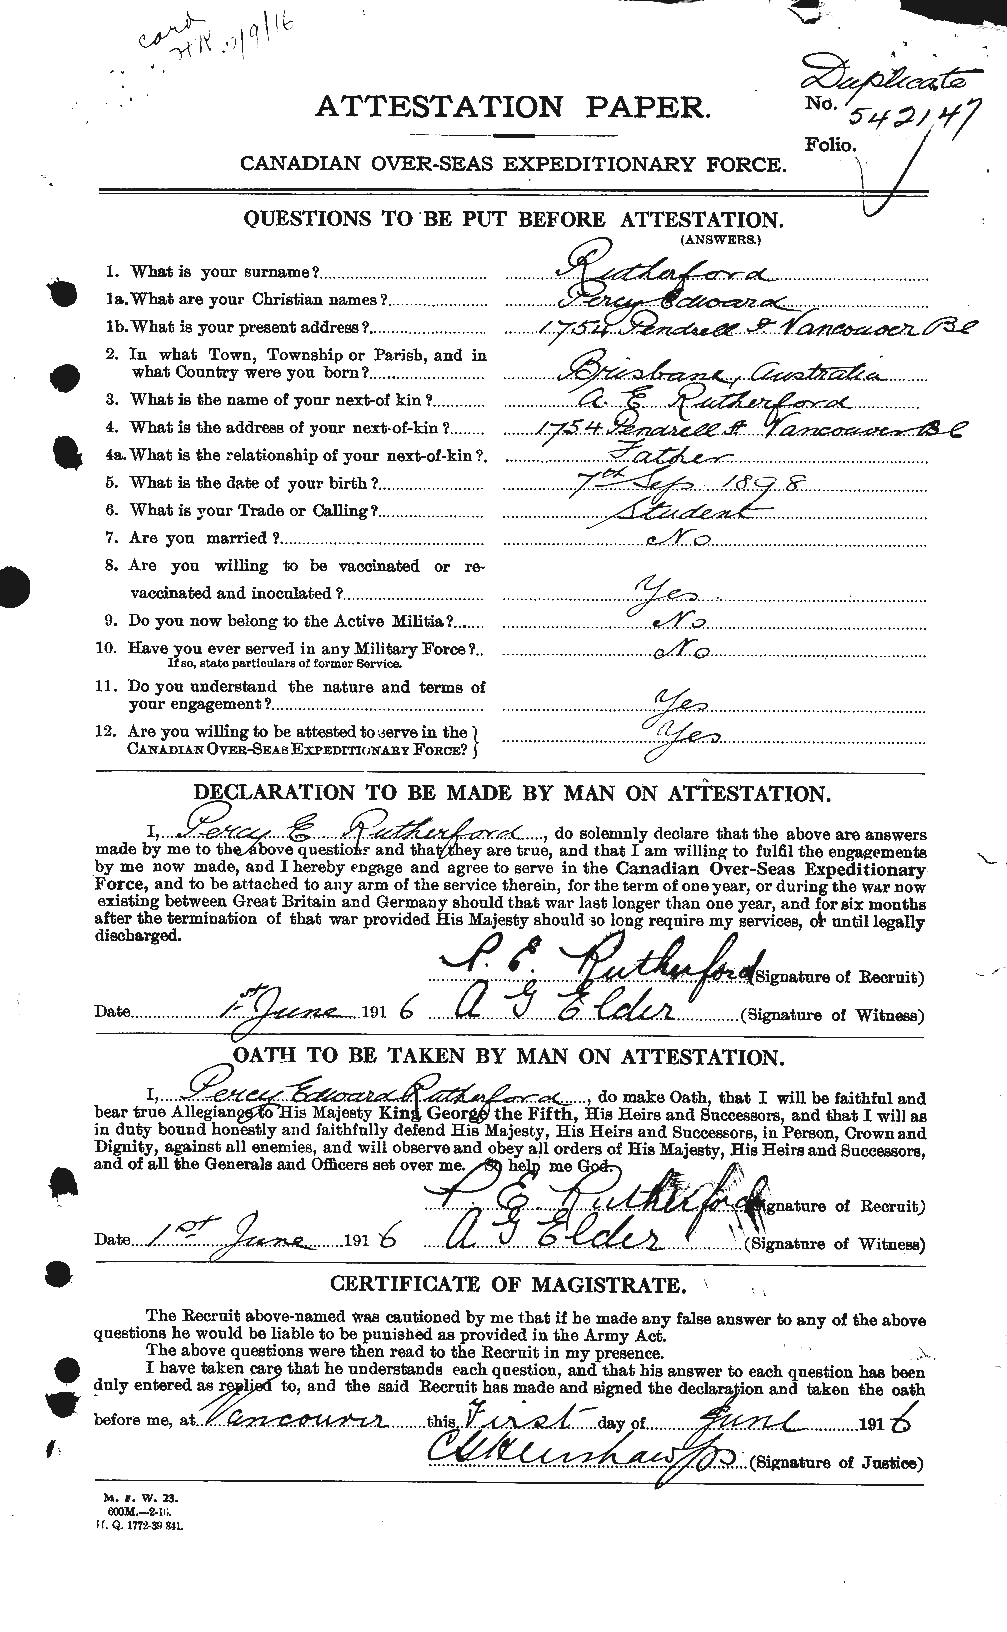 Personnel Records of the First World War - CEF 620668a